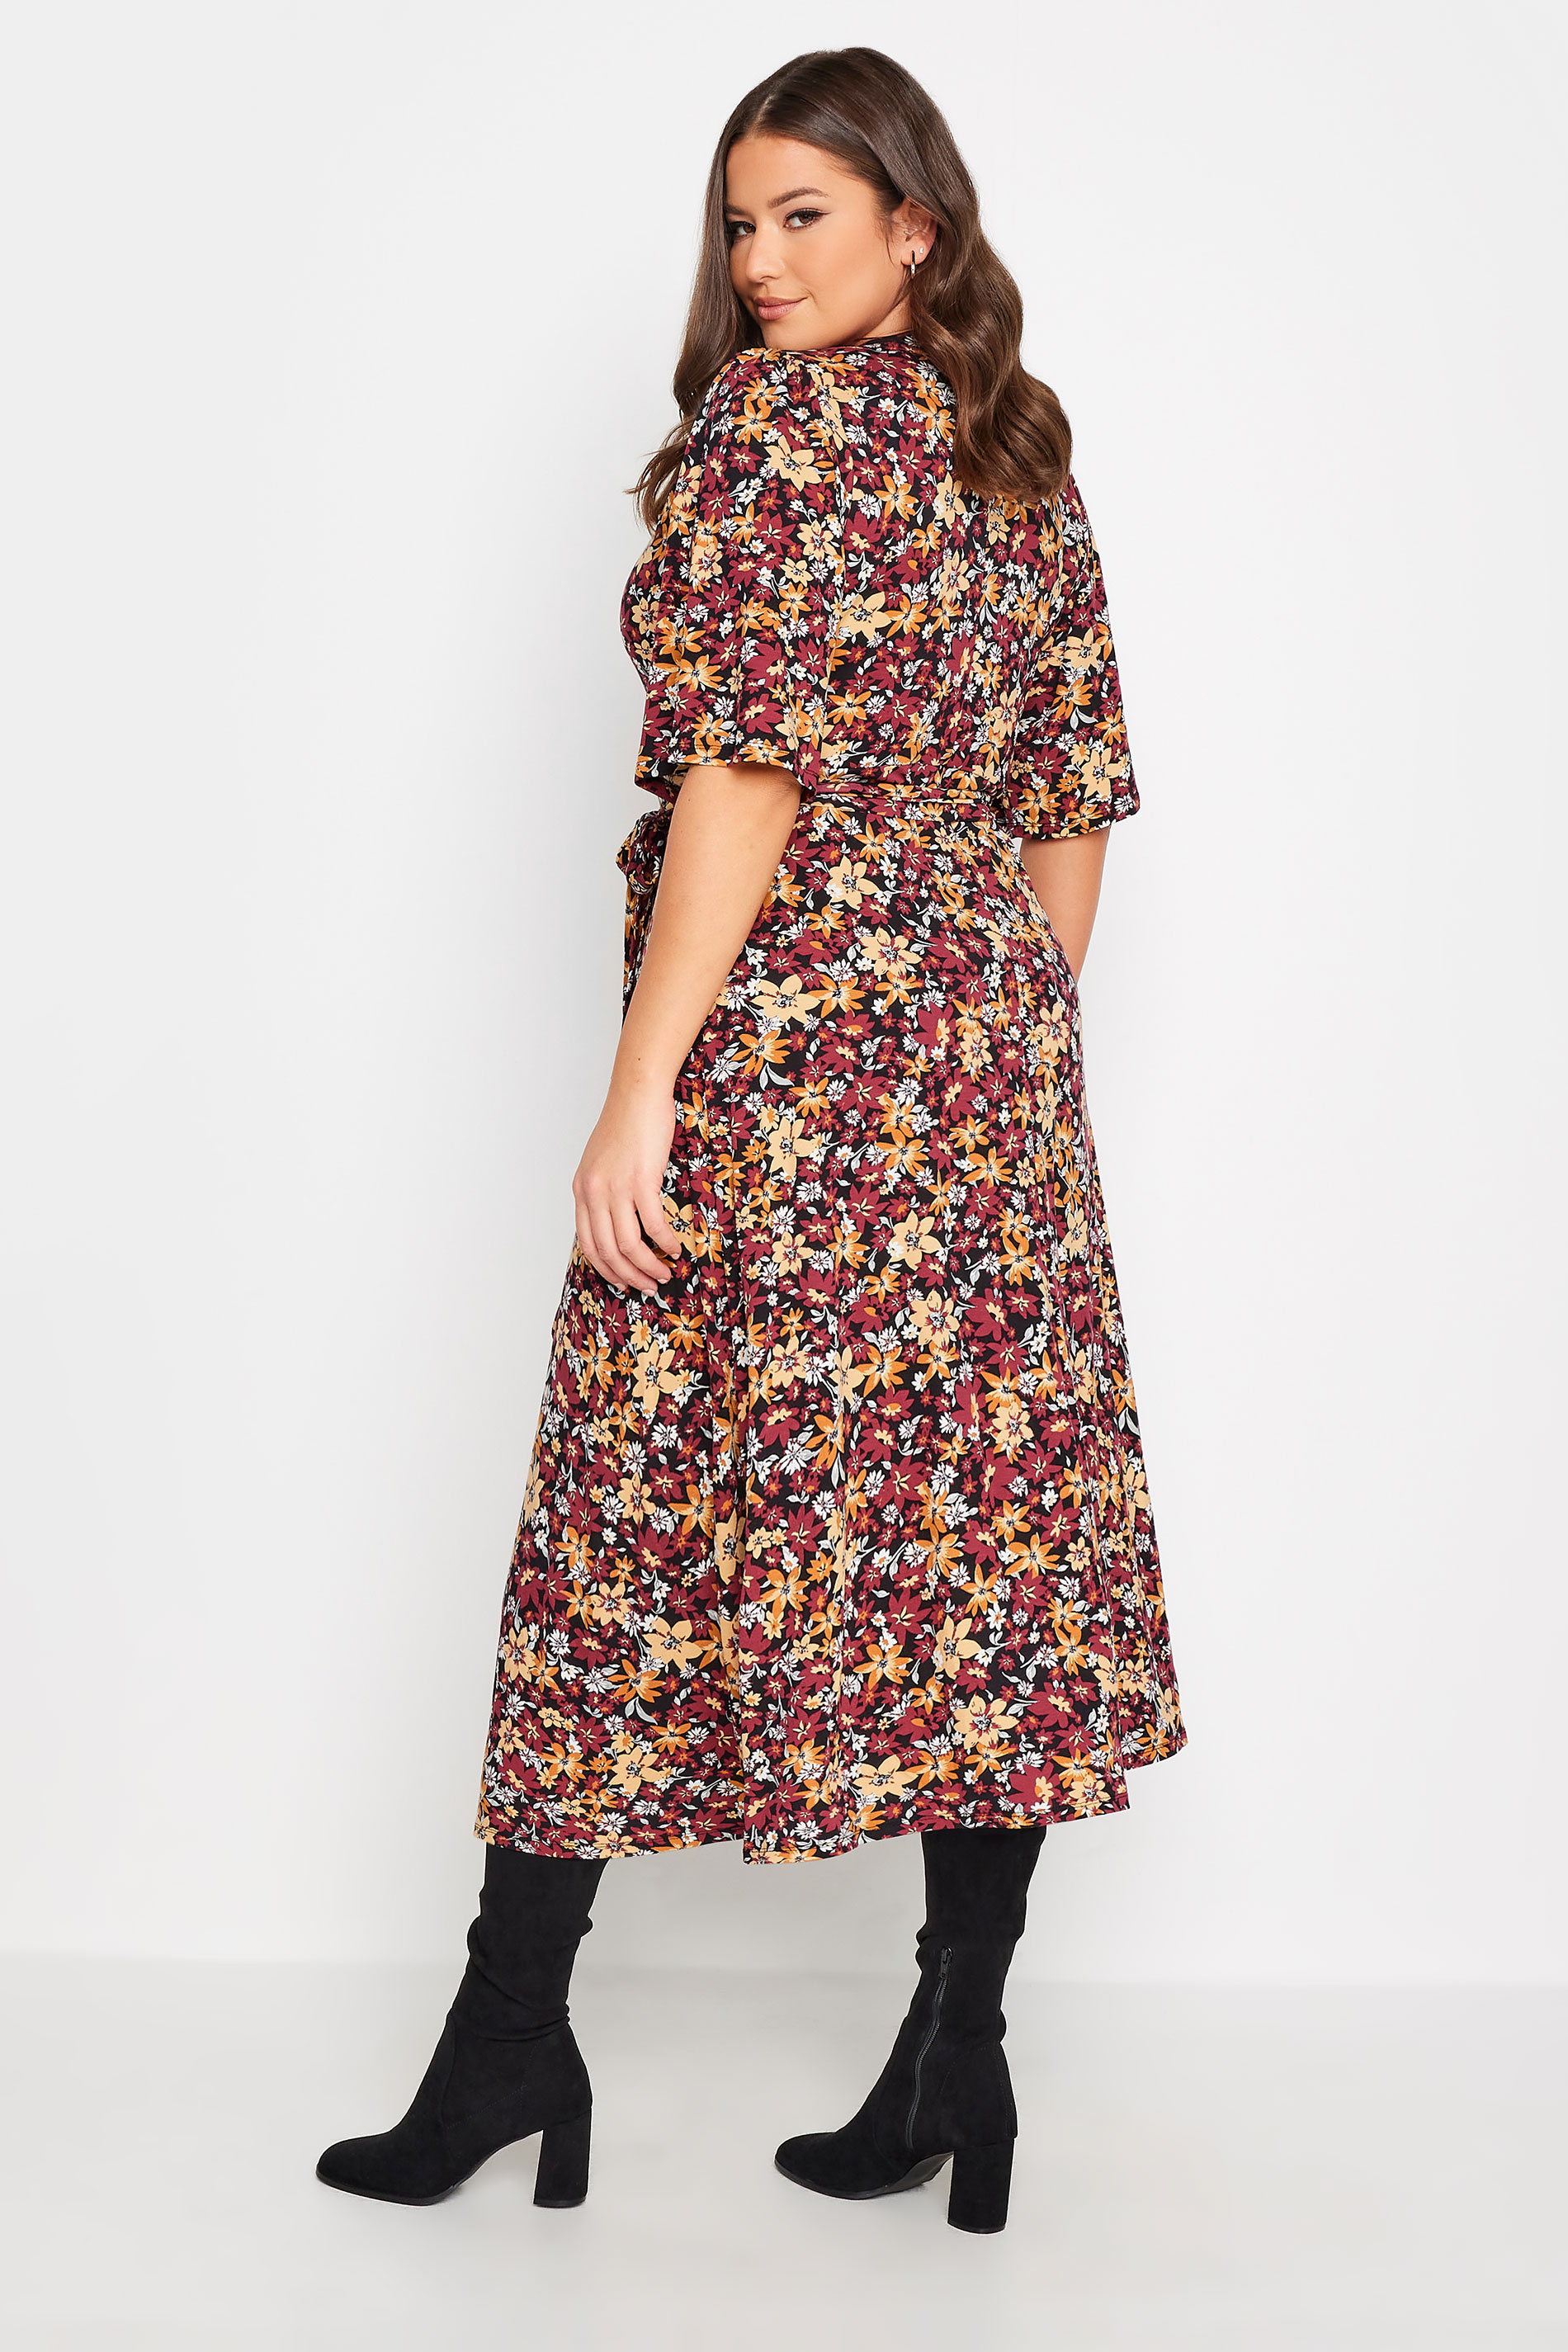 YOURS Plus Size Burgandy Red Floral Print Midaxi Wrap Dress | Yours Clothing 3